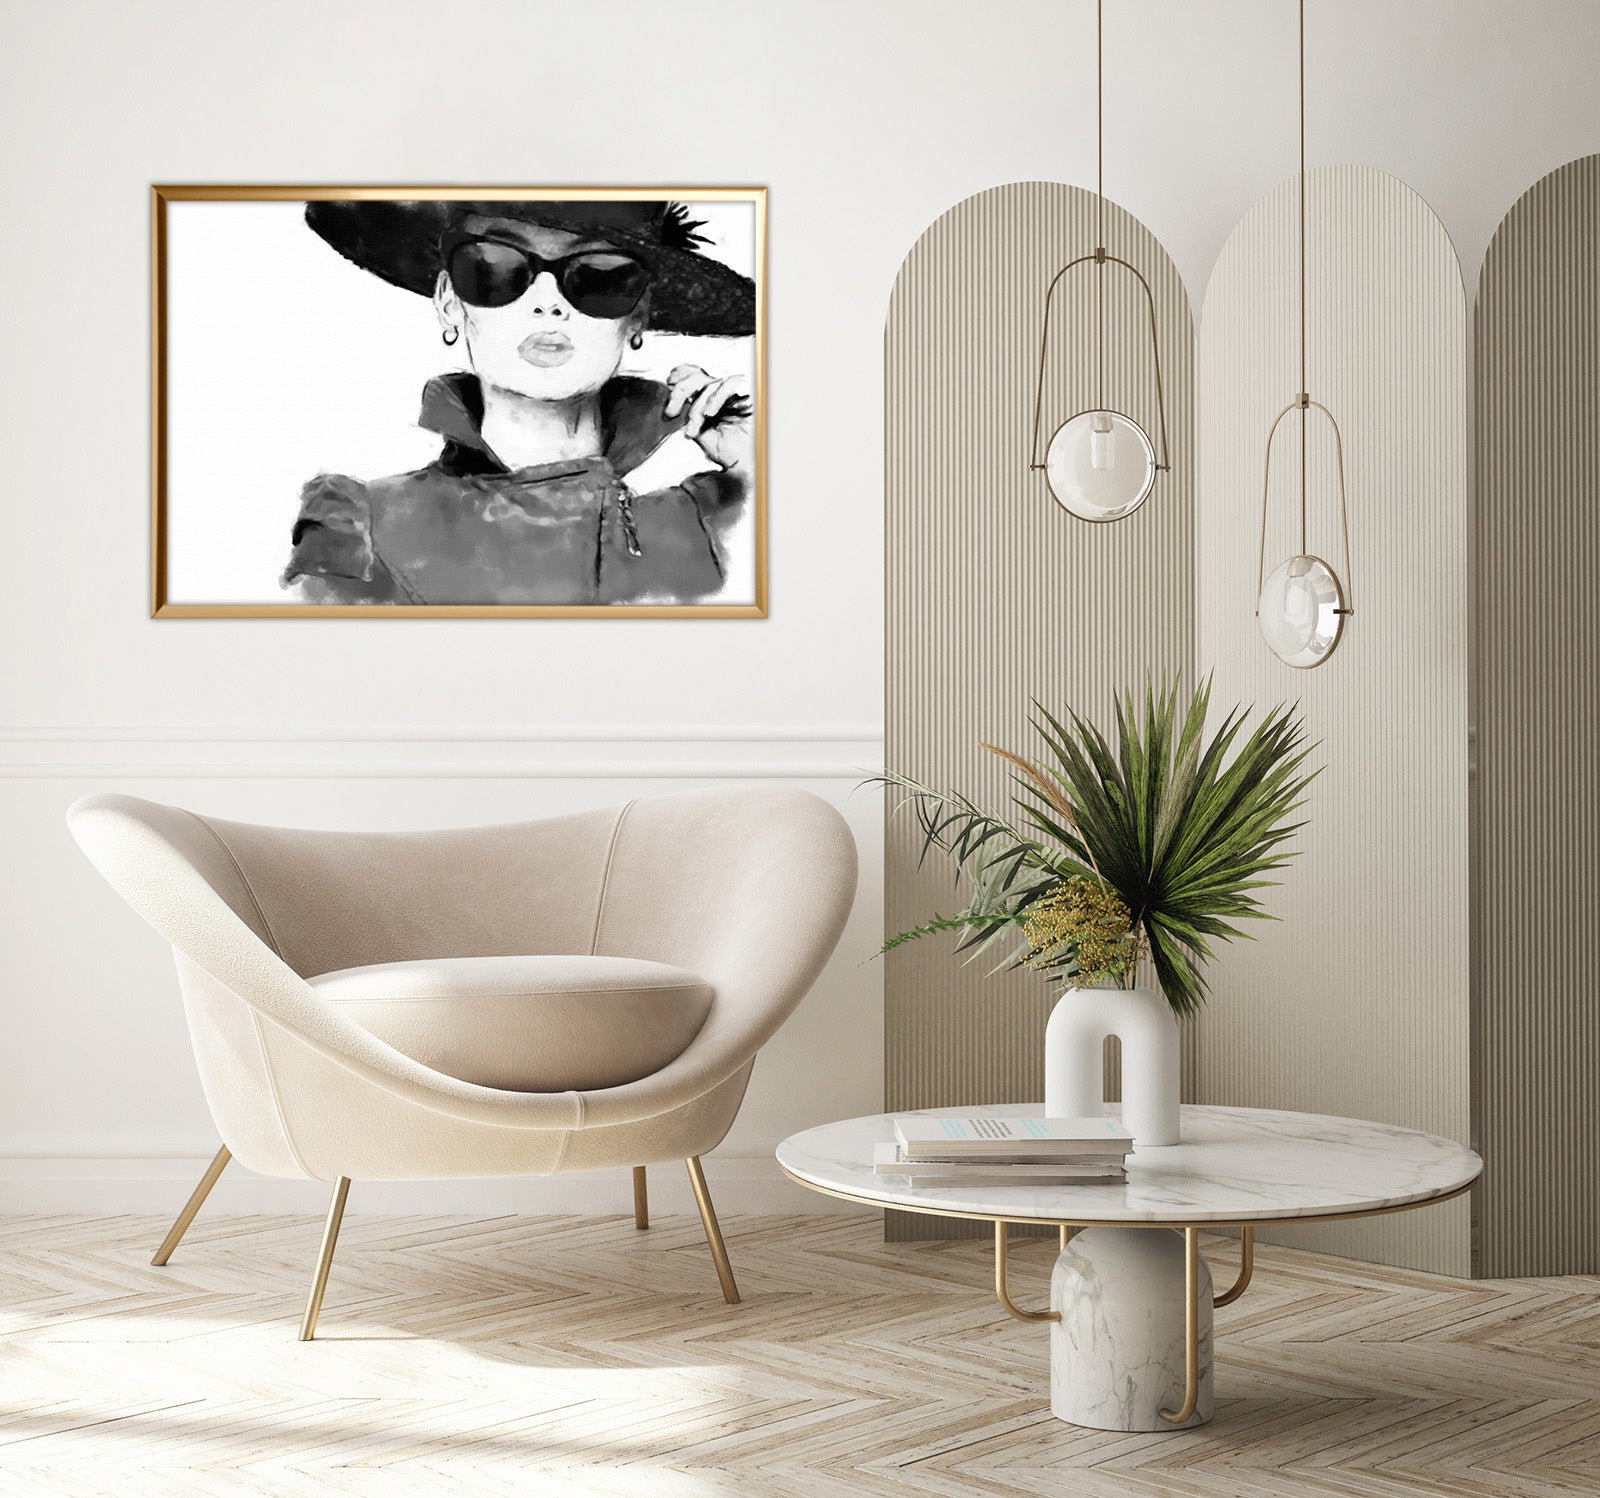 "Canvas Wall Art ( A Woman Wearing an Elegant Hat and Sunglasses) "